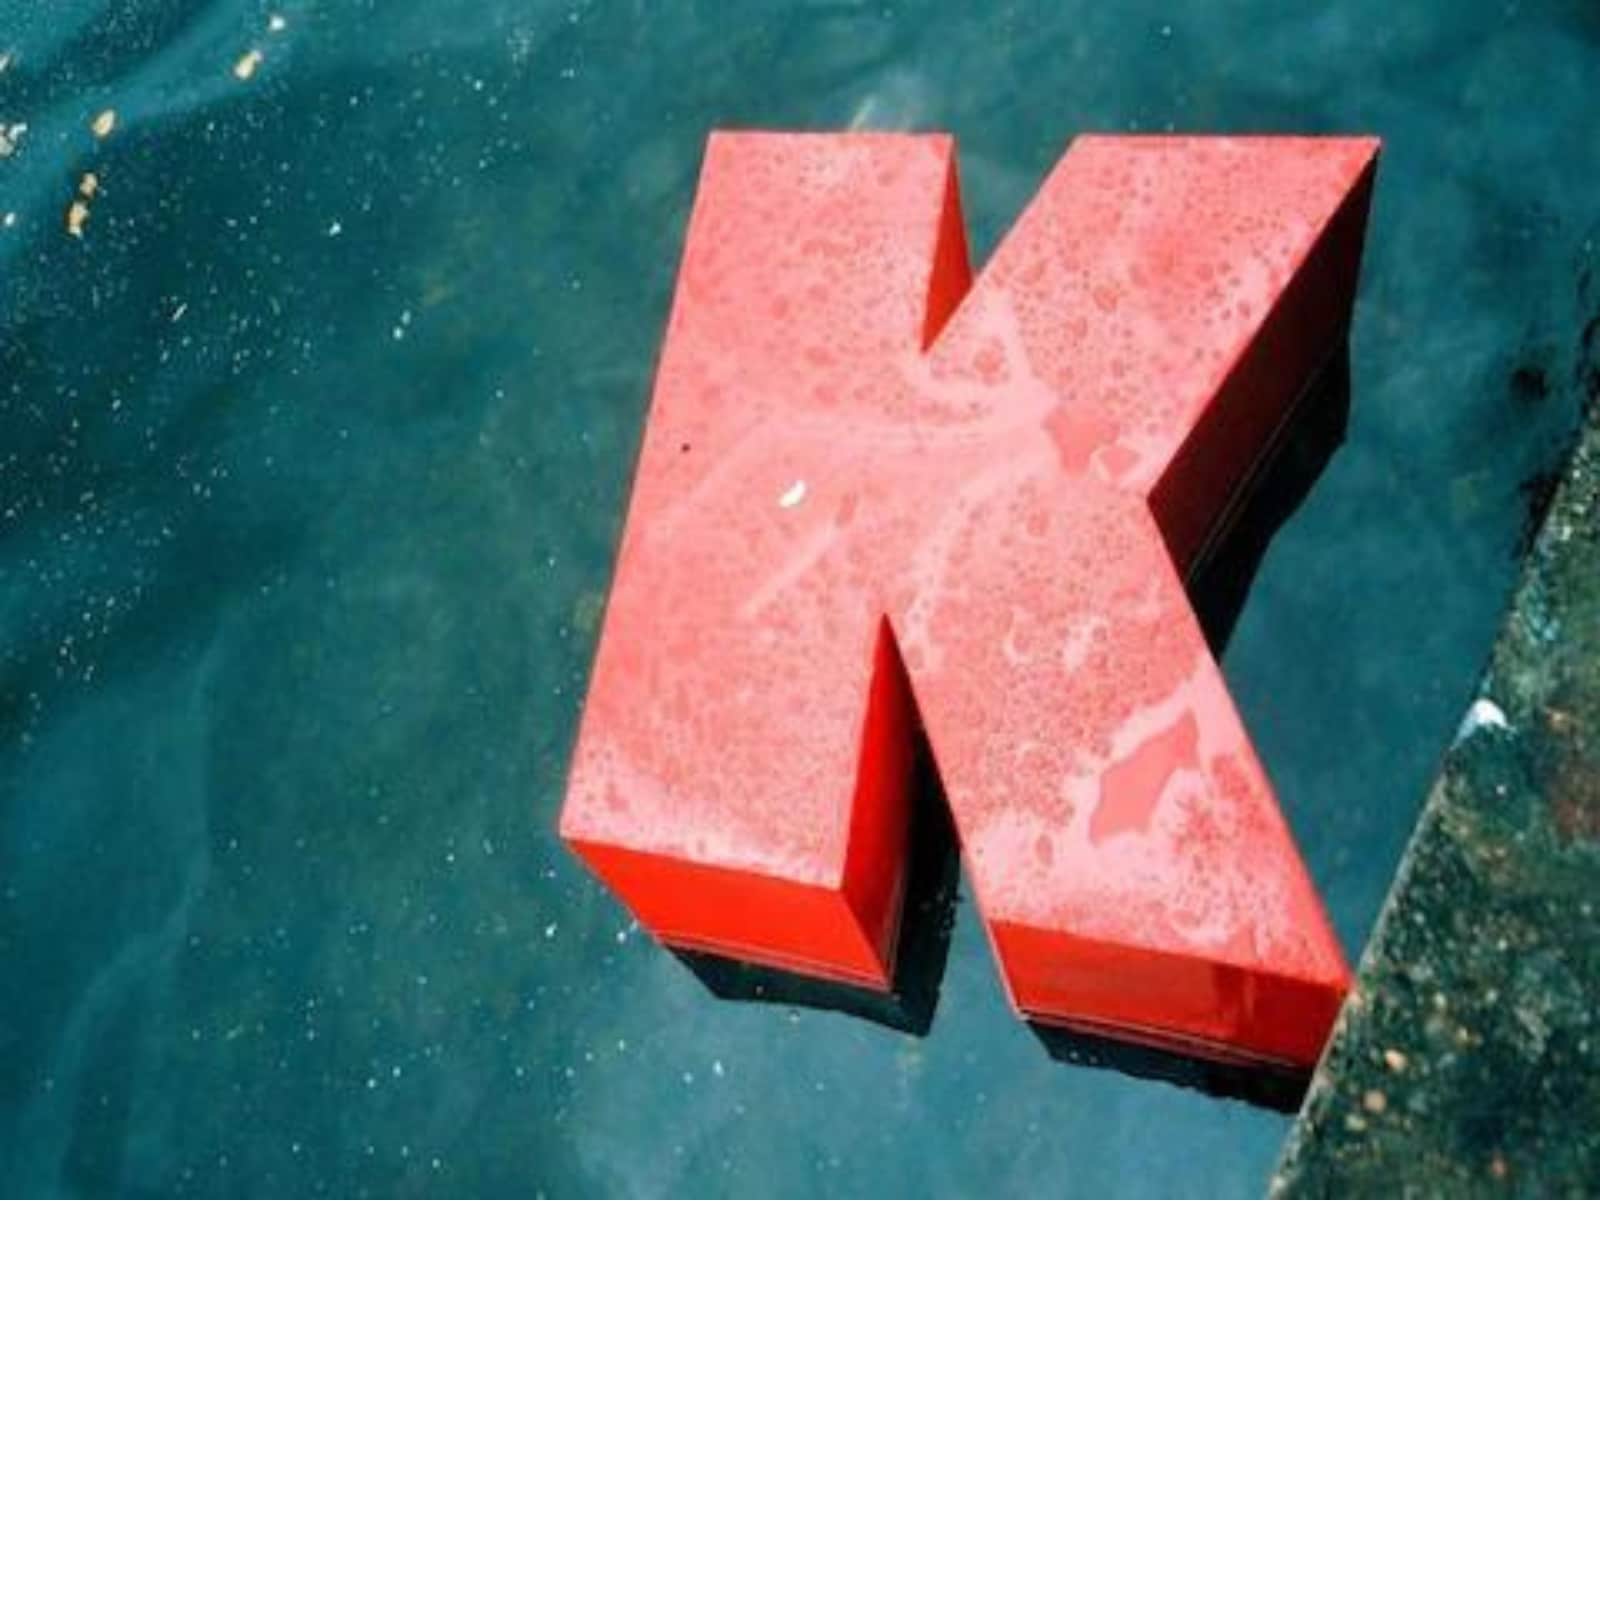 Why Is Thousand Abbreviated As 'k'? Find Out Here - News18